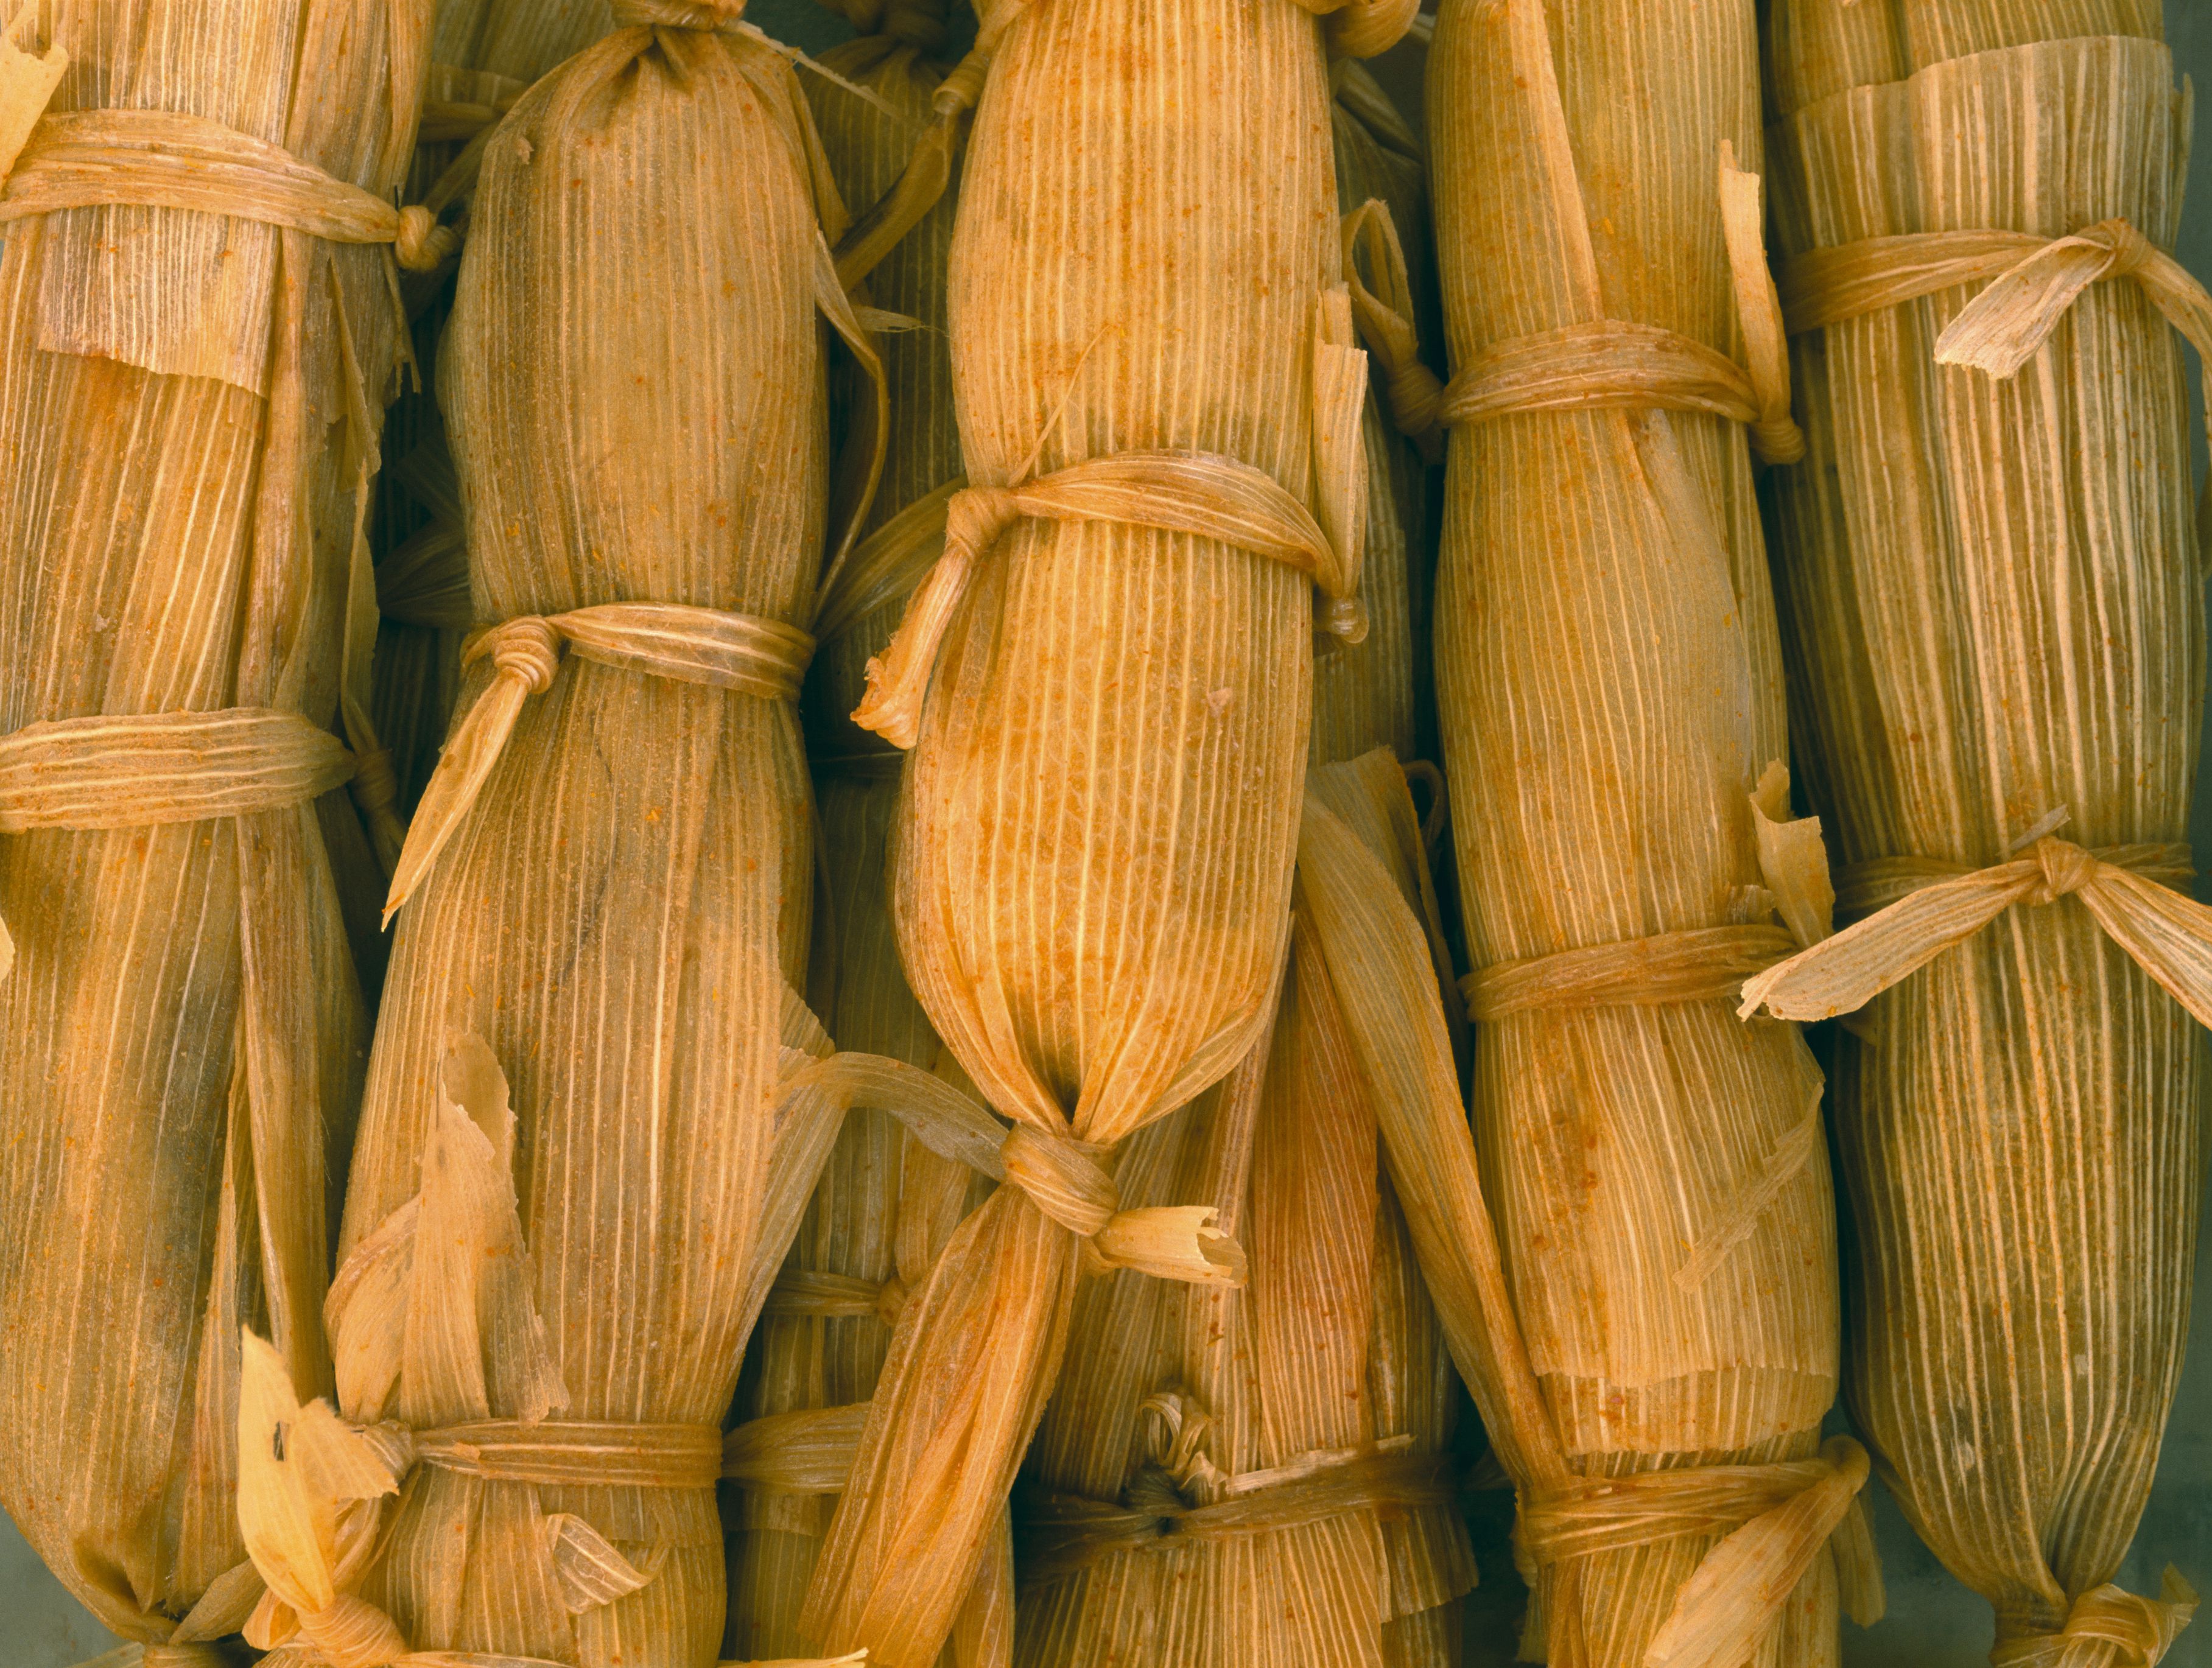 7 SUN'S CORN HUSKS FOR TAMALES - SPECIALTY FOODS